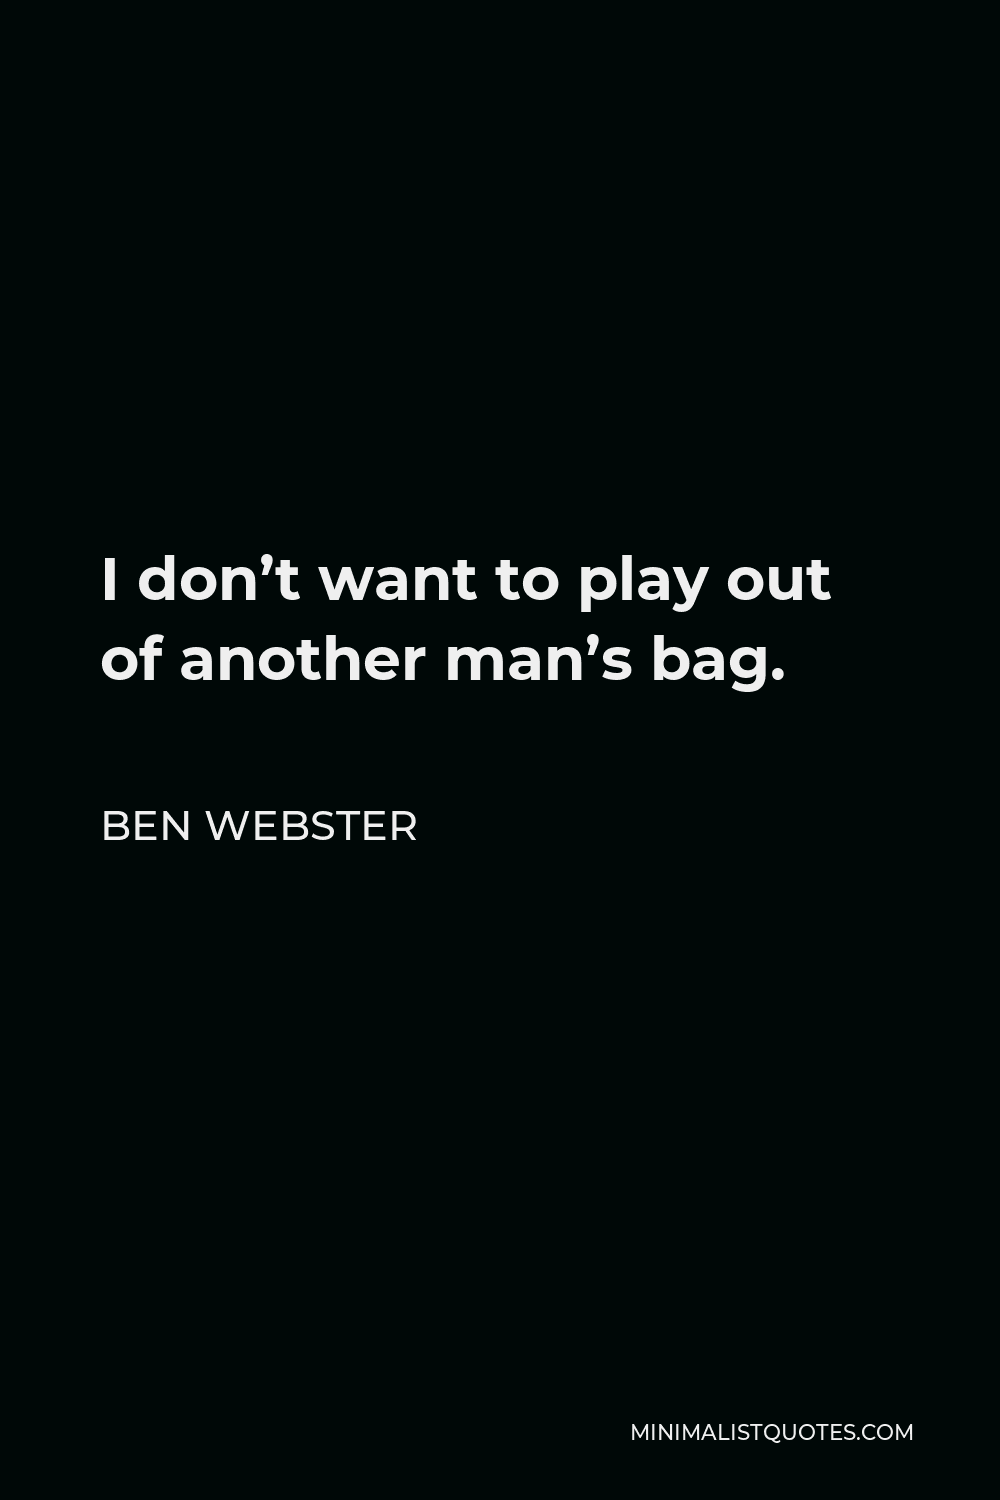 Ben Webster Quote - I don’t want to play out of another man’s bag.